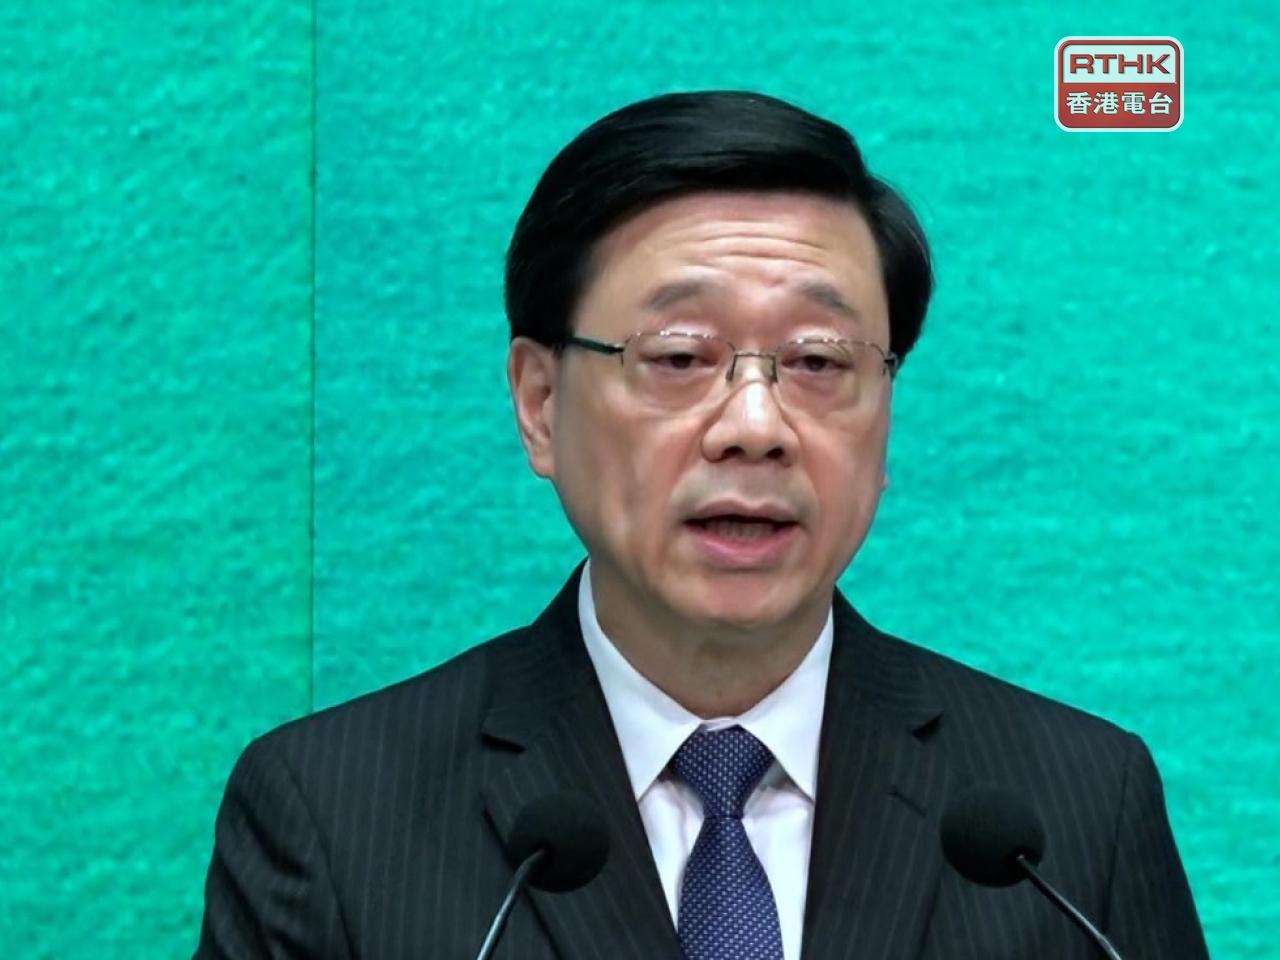 HK doesn't need a 'fake news' law, says CE